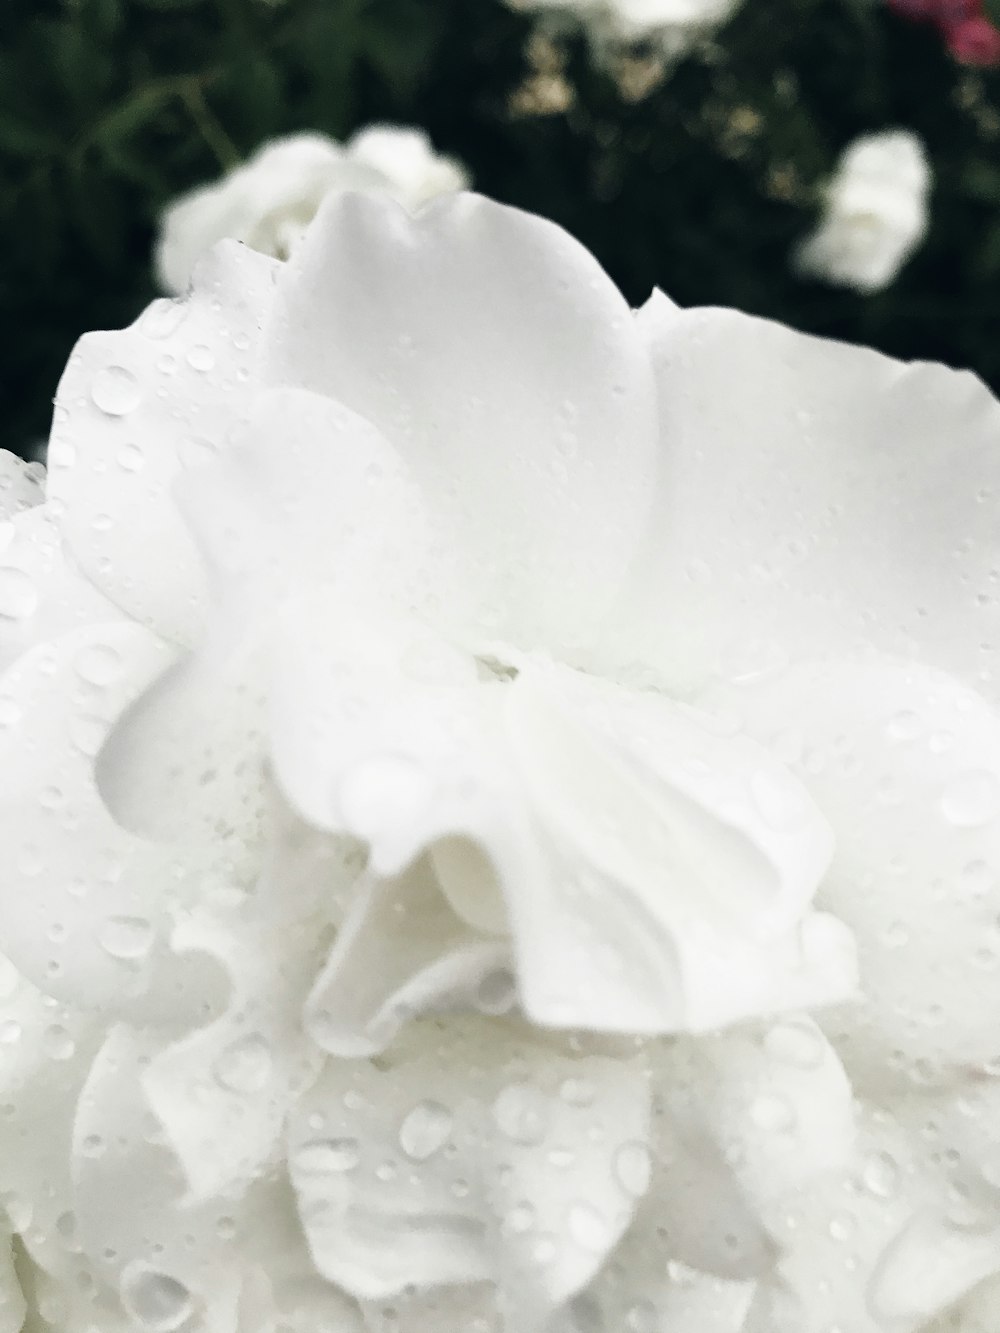 white flower with water droplets